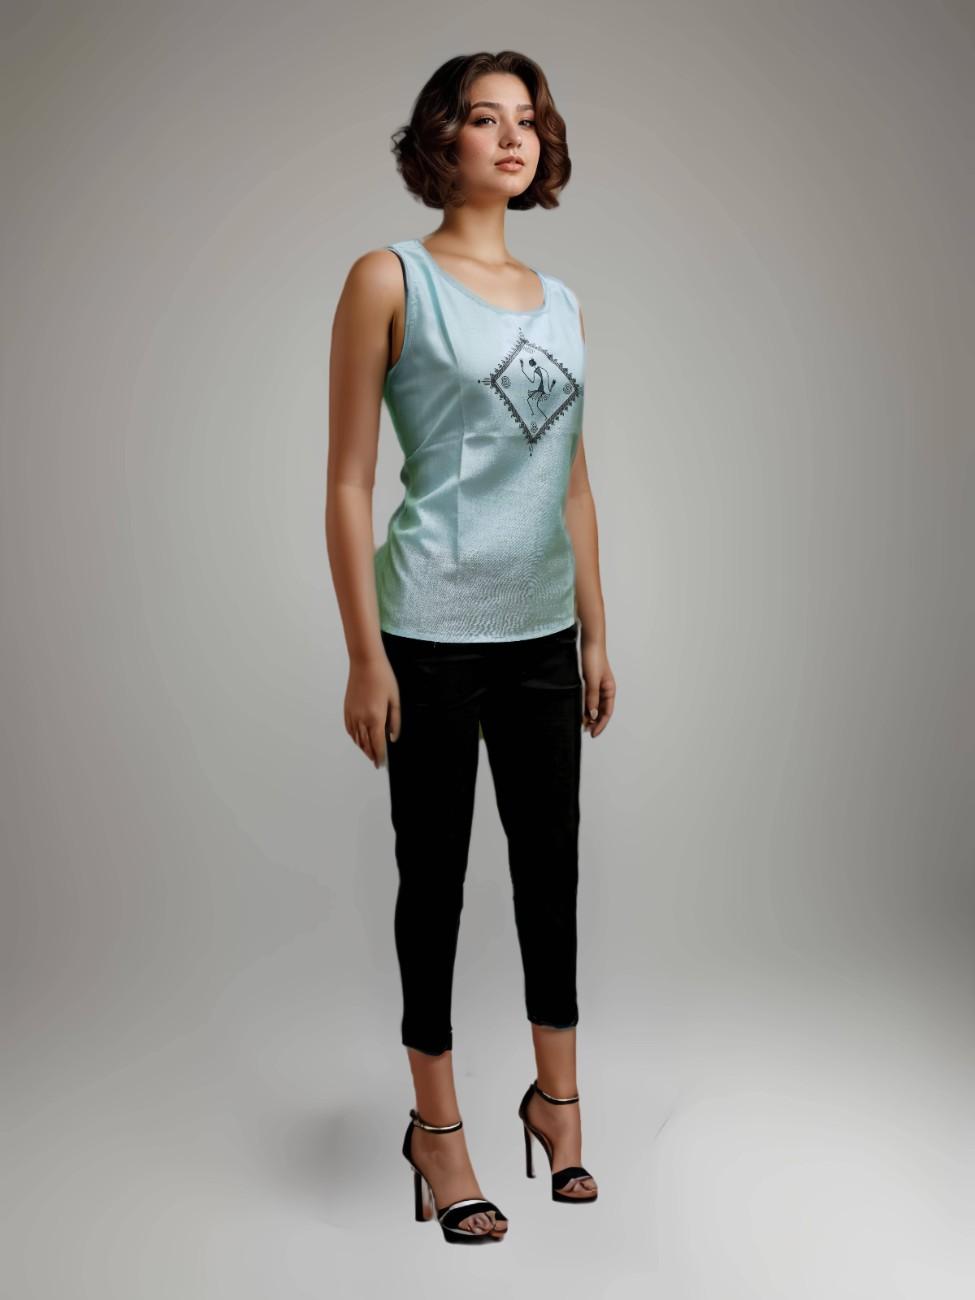 Aabandh's Sleevless Top - Warli ( Ruby Cotton )